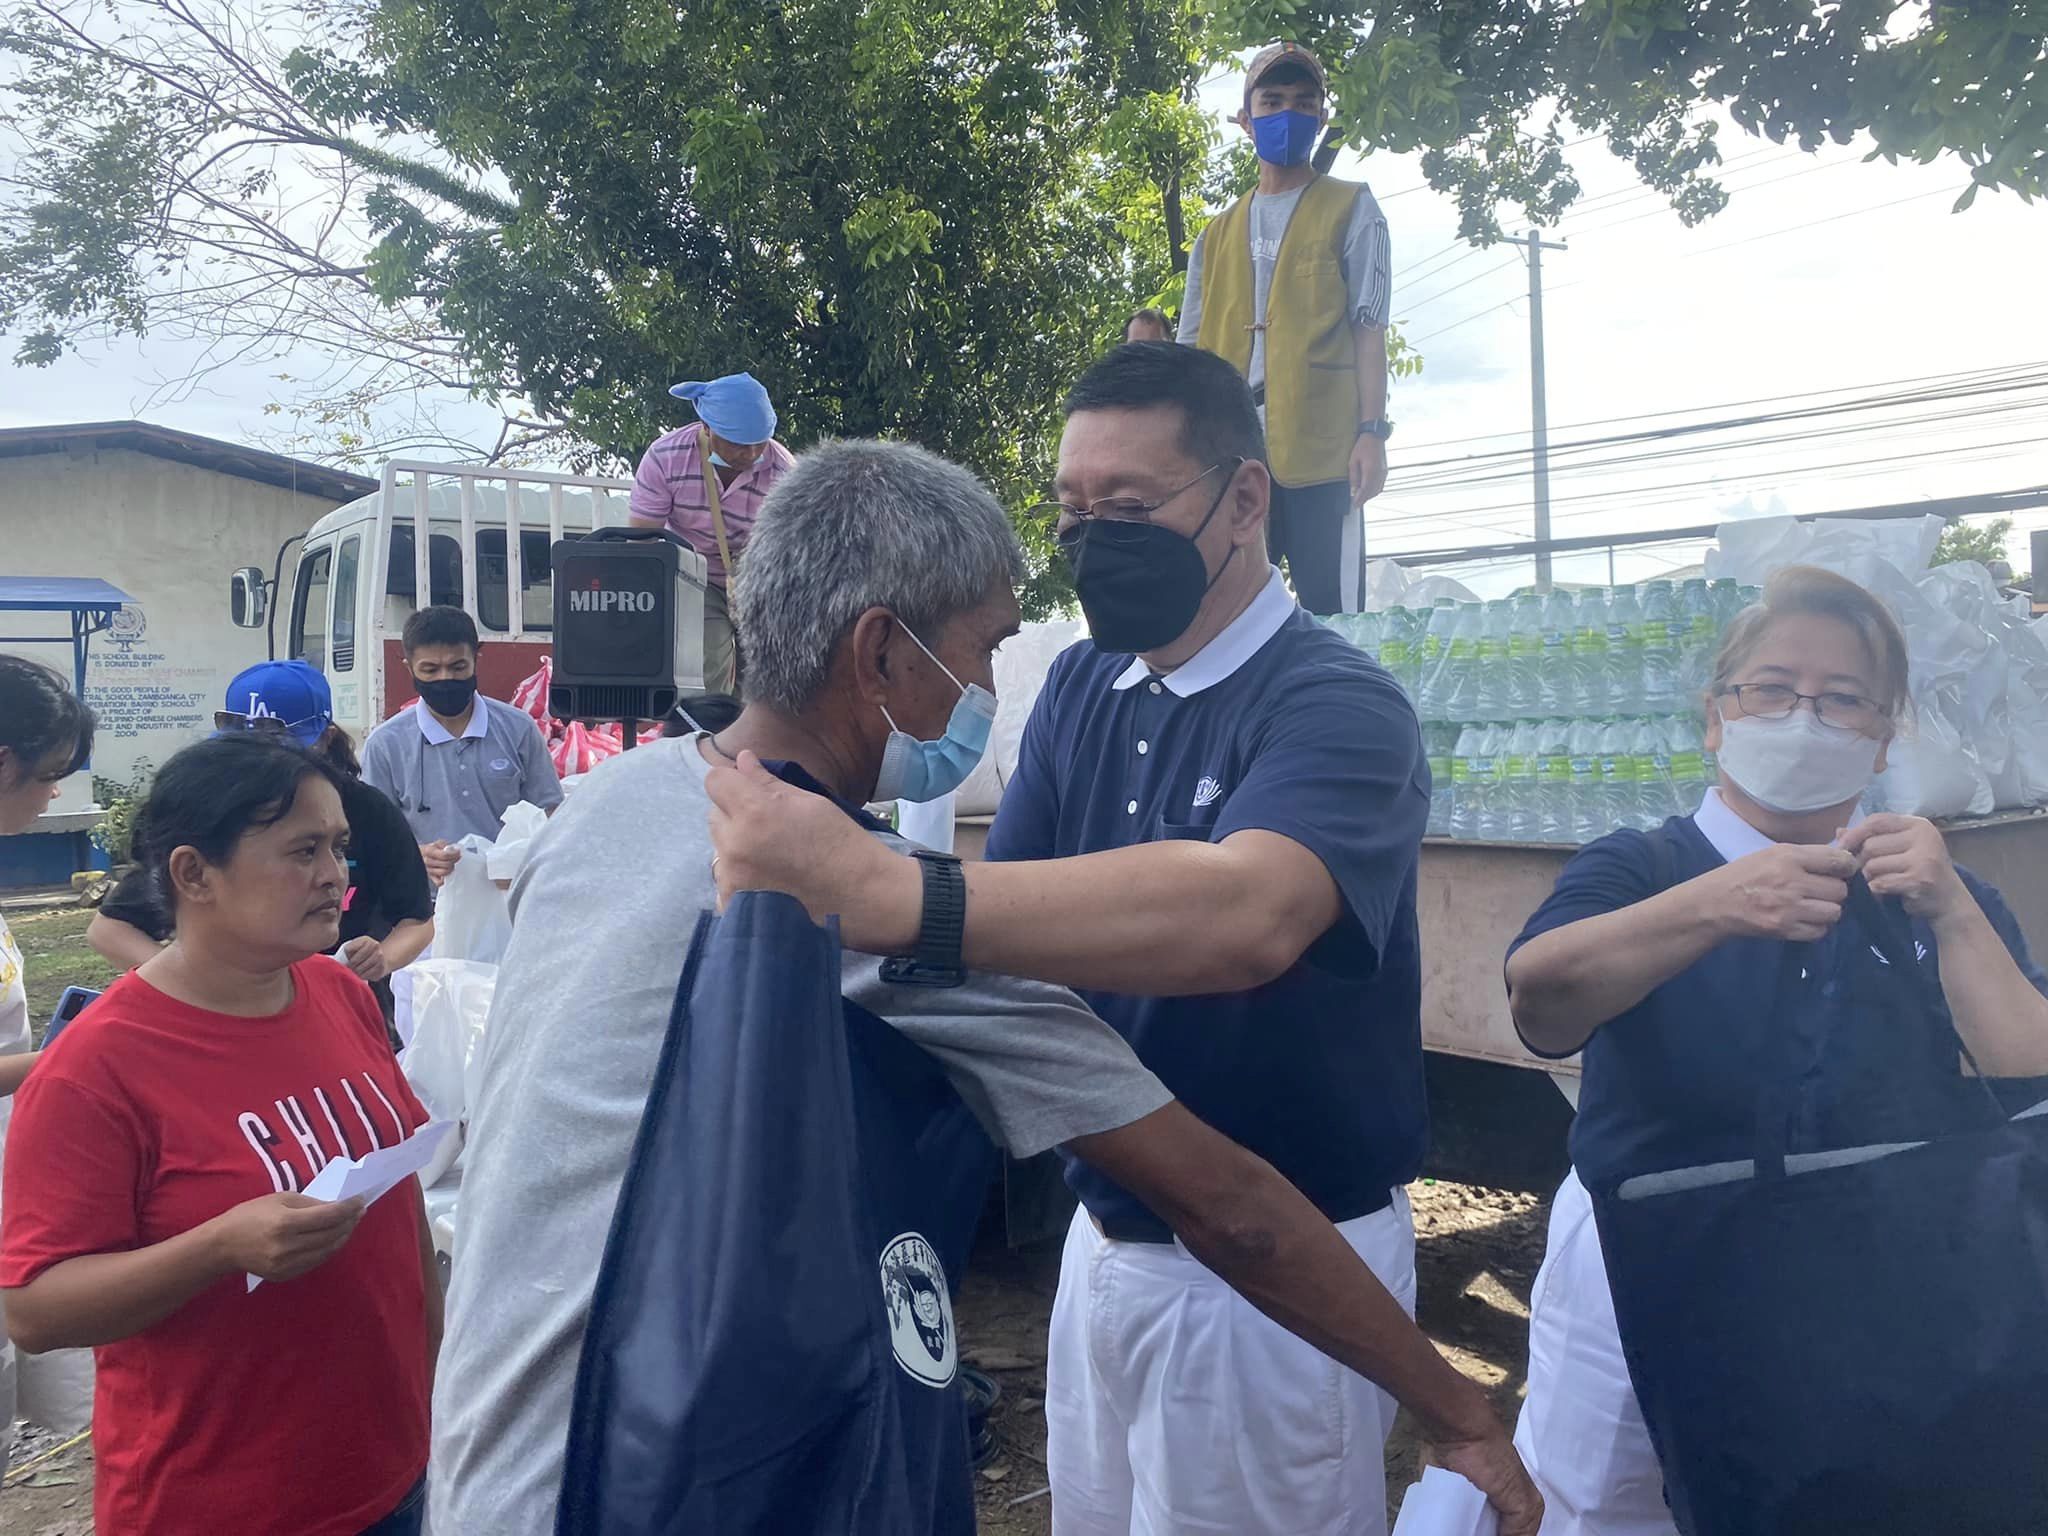 Tzu Chi Zamboanga volunteers provide immediate relief to families affected by Typhoon Paeng from October 29 to October 31 in several evacuation centers in Zamboanga City.